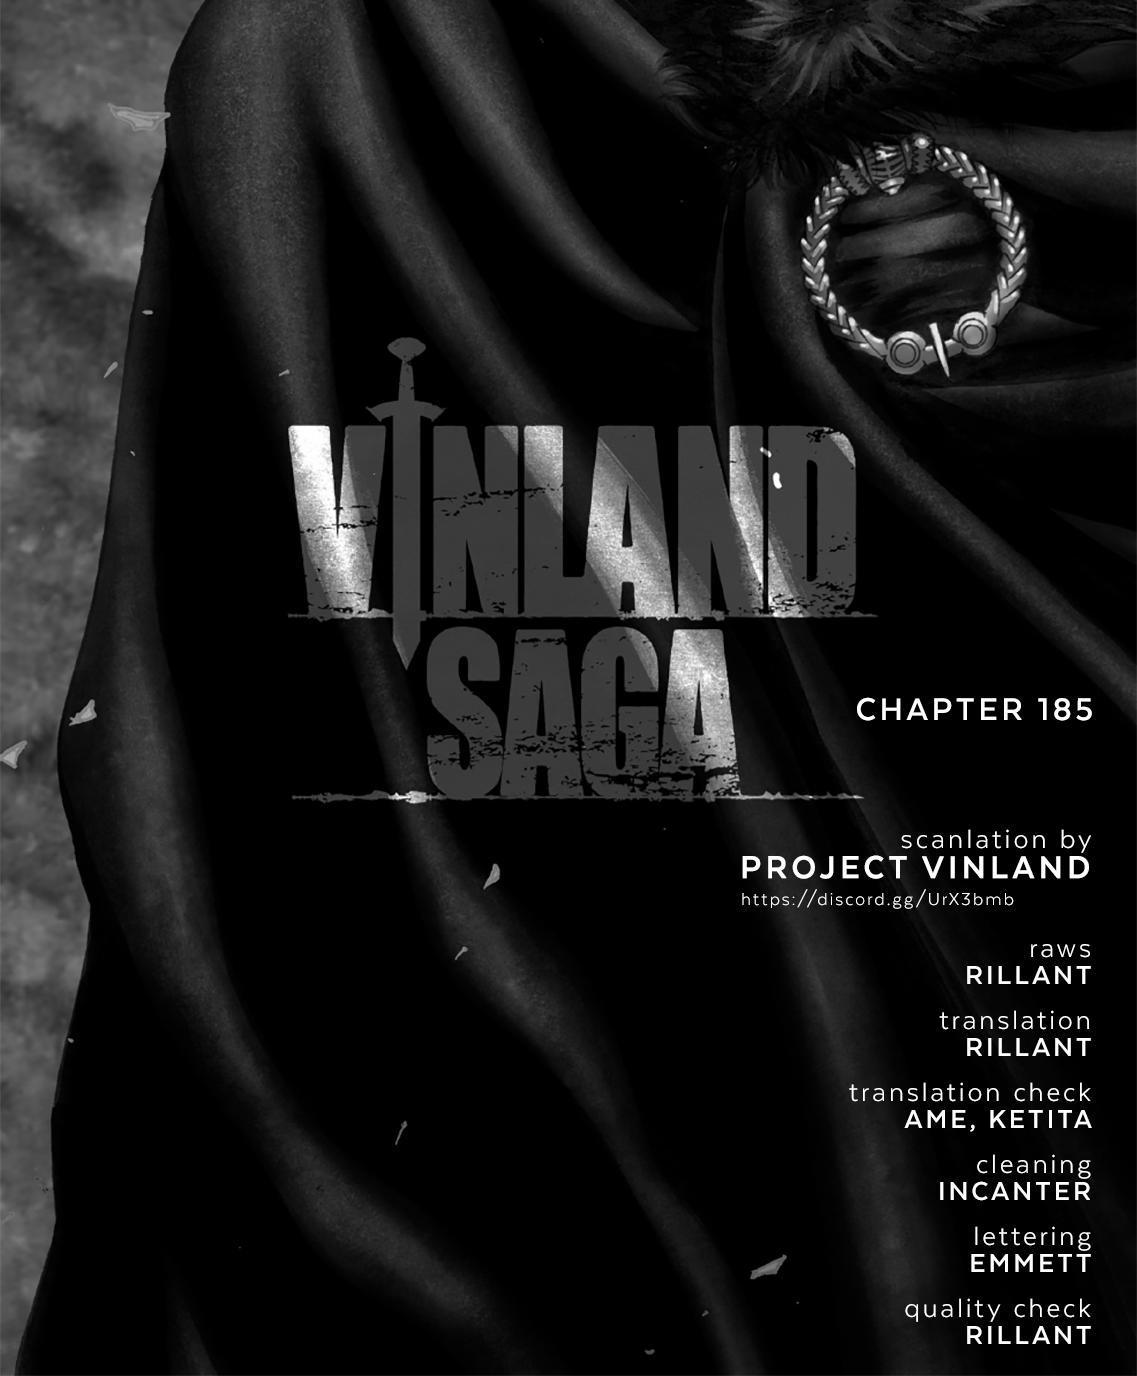 vinland saga 185, vinland saga 185, Read vinland saga 185, vinland saga 185 Manga, vinland saga 185 english, vinland saga 185 raw manga, vinland saga 185 online, vinland saga 185 high quality, vinland saga 185 chapter, vinland saga 185 manga scan